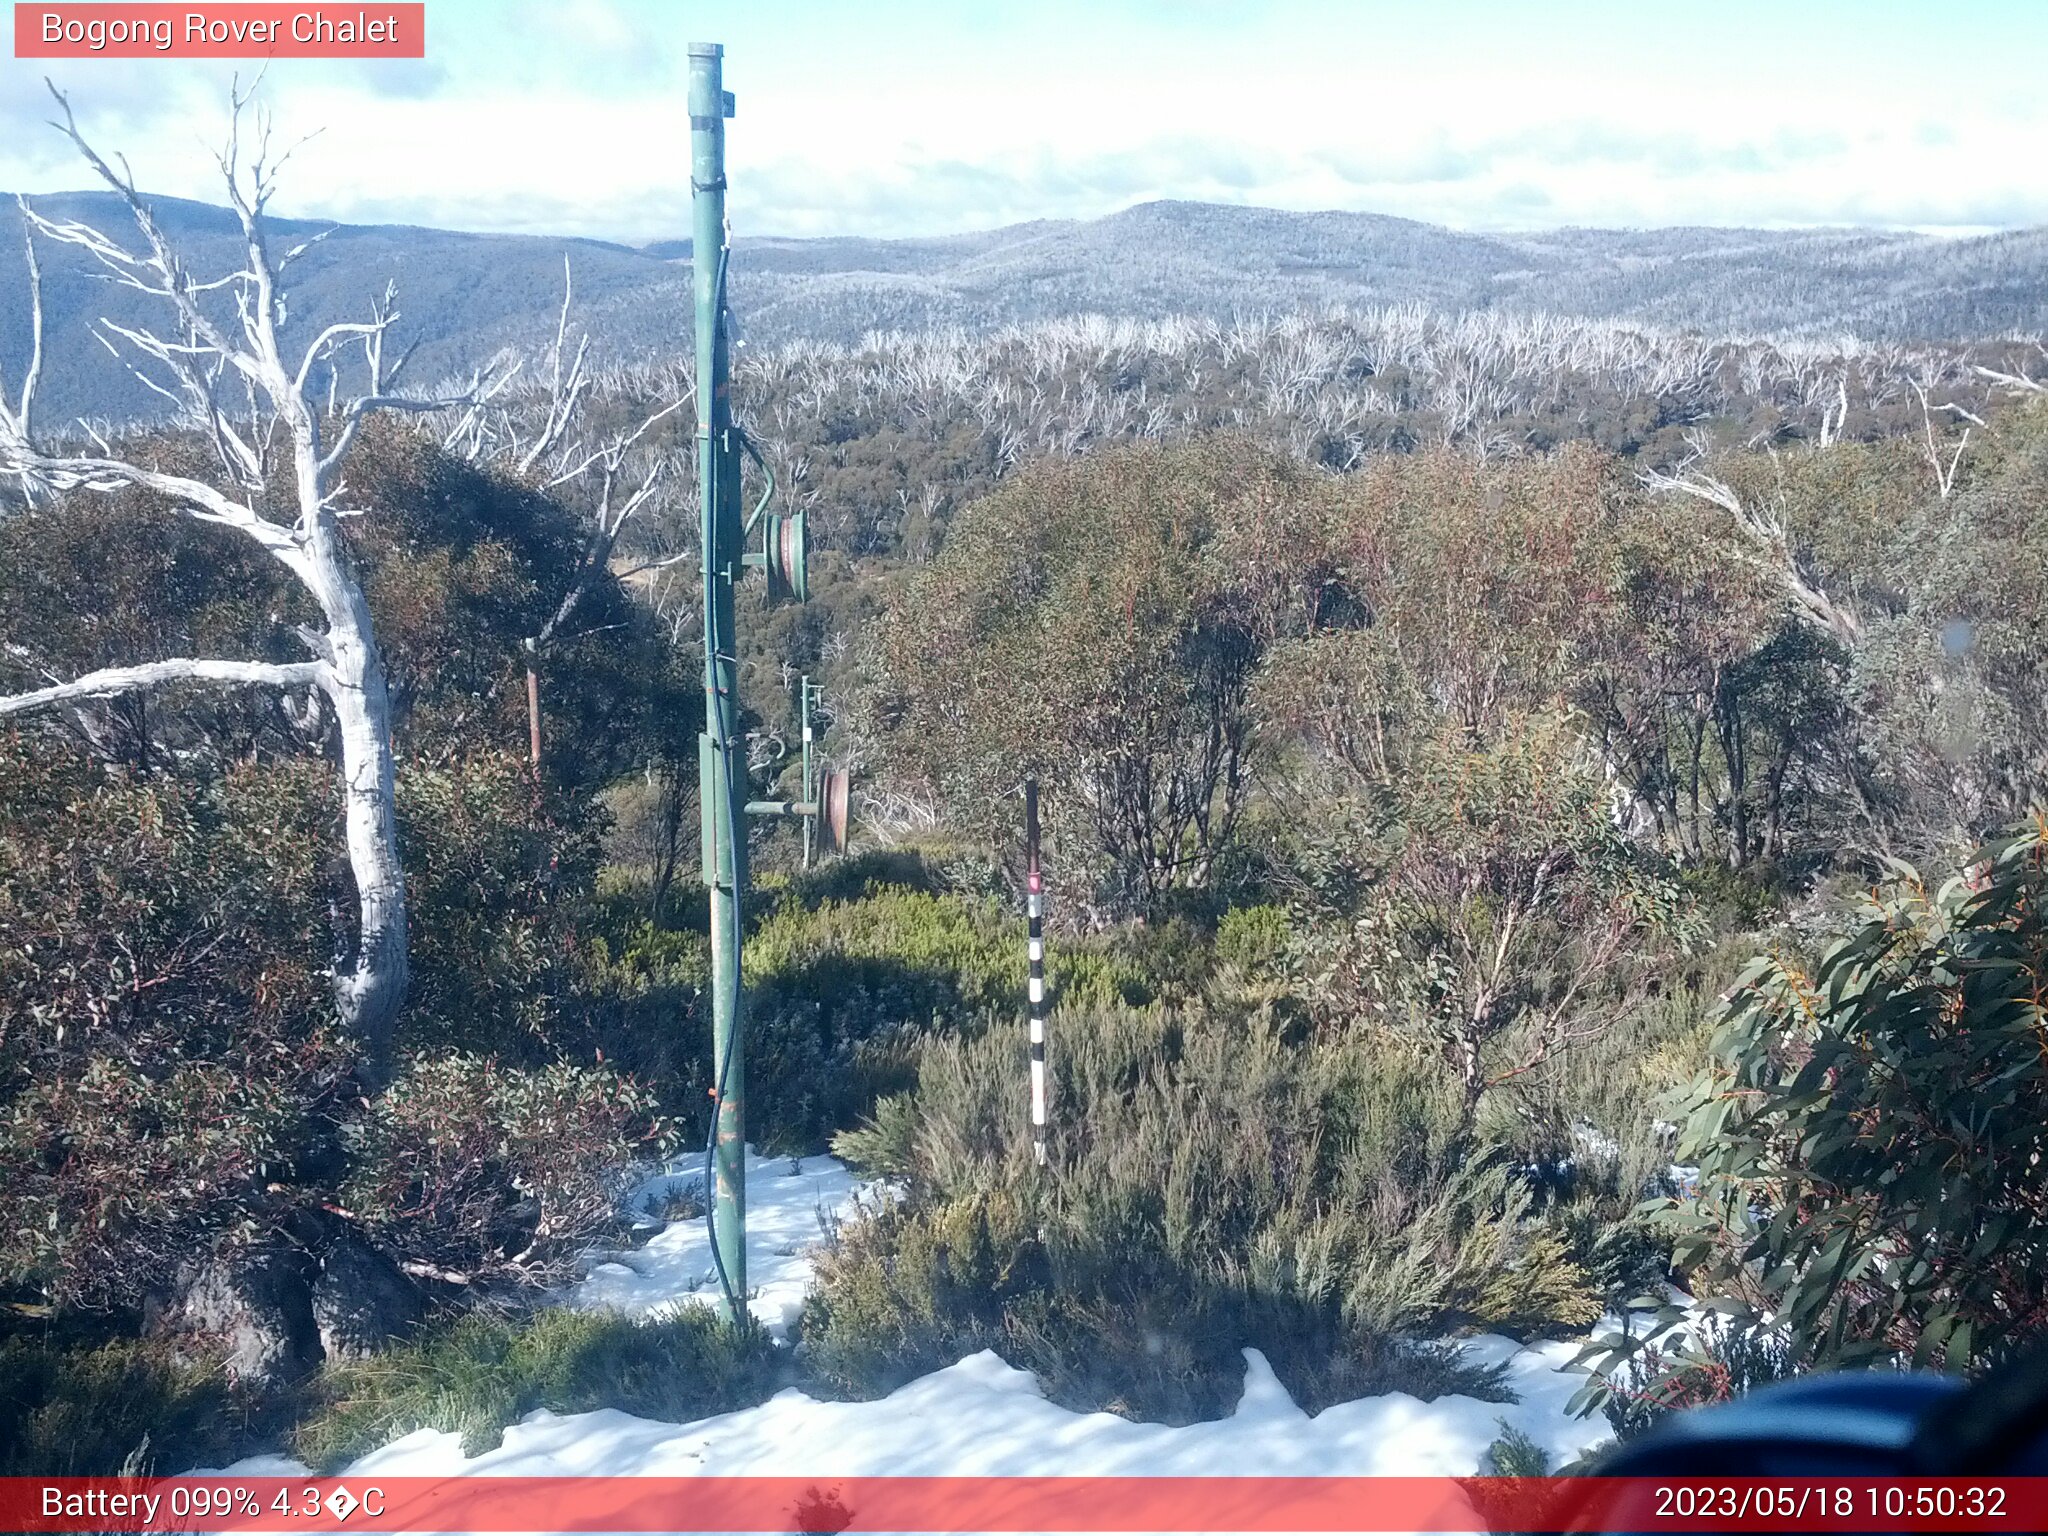 Bogong Web Cam 10:50am Thursday 18th of May 2023